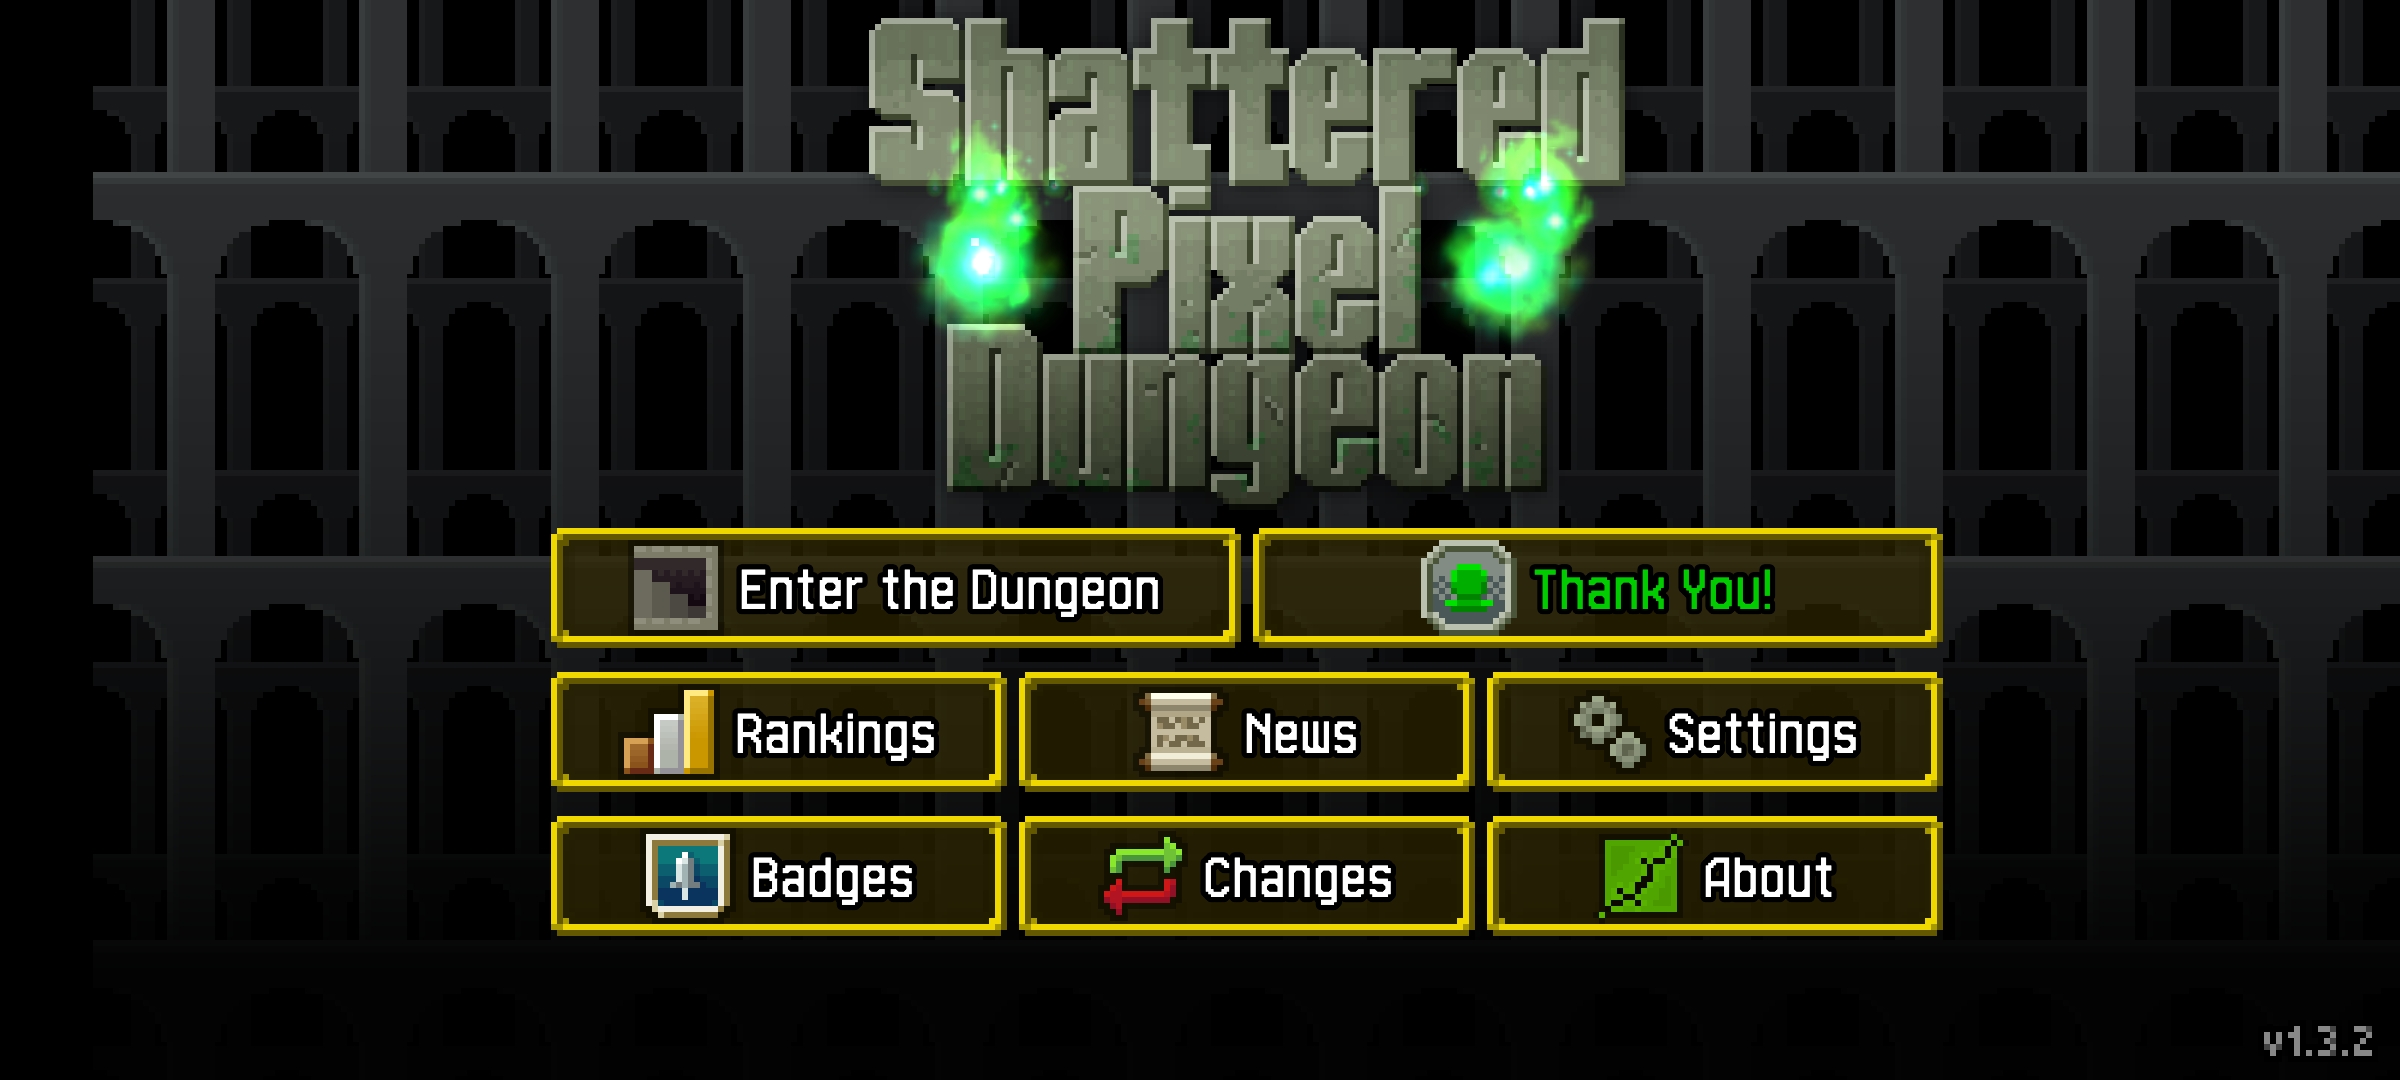 [Game Android] Shattered Pixel Dungeon Roguelike Dungeon Crawler